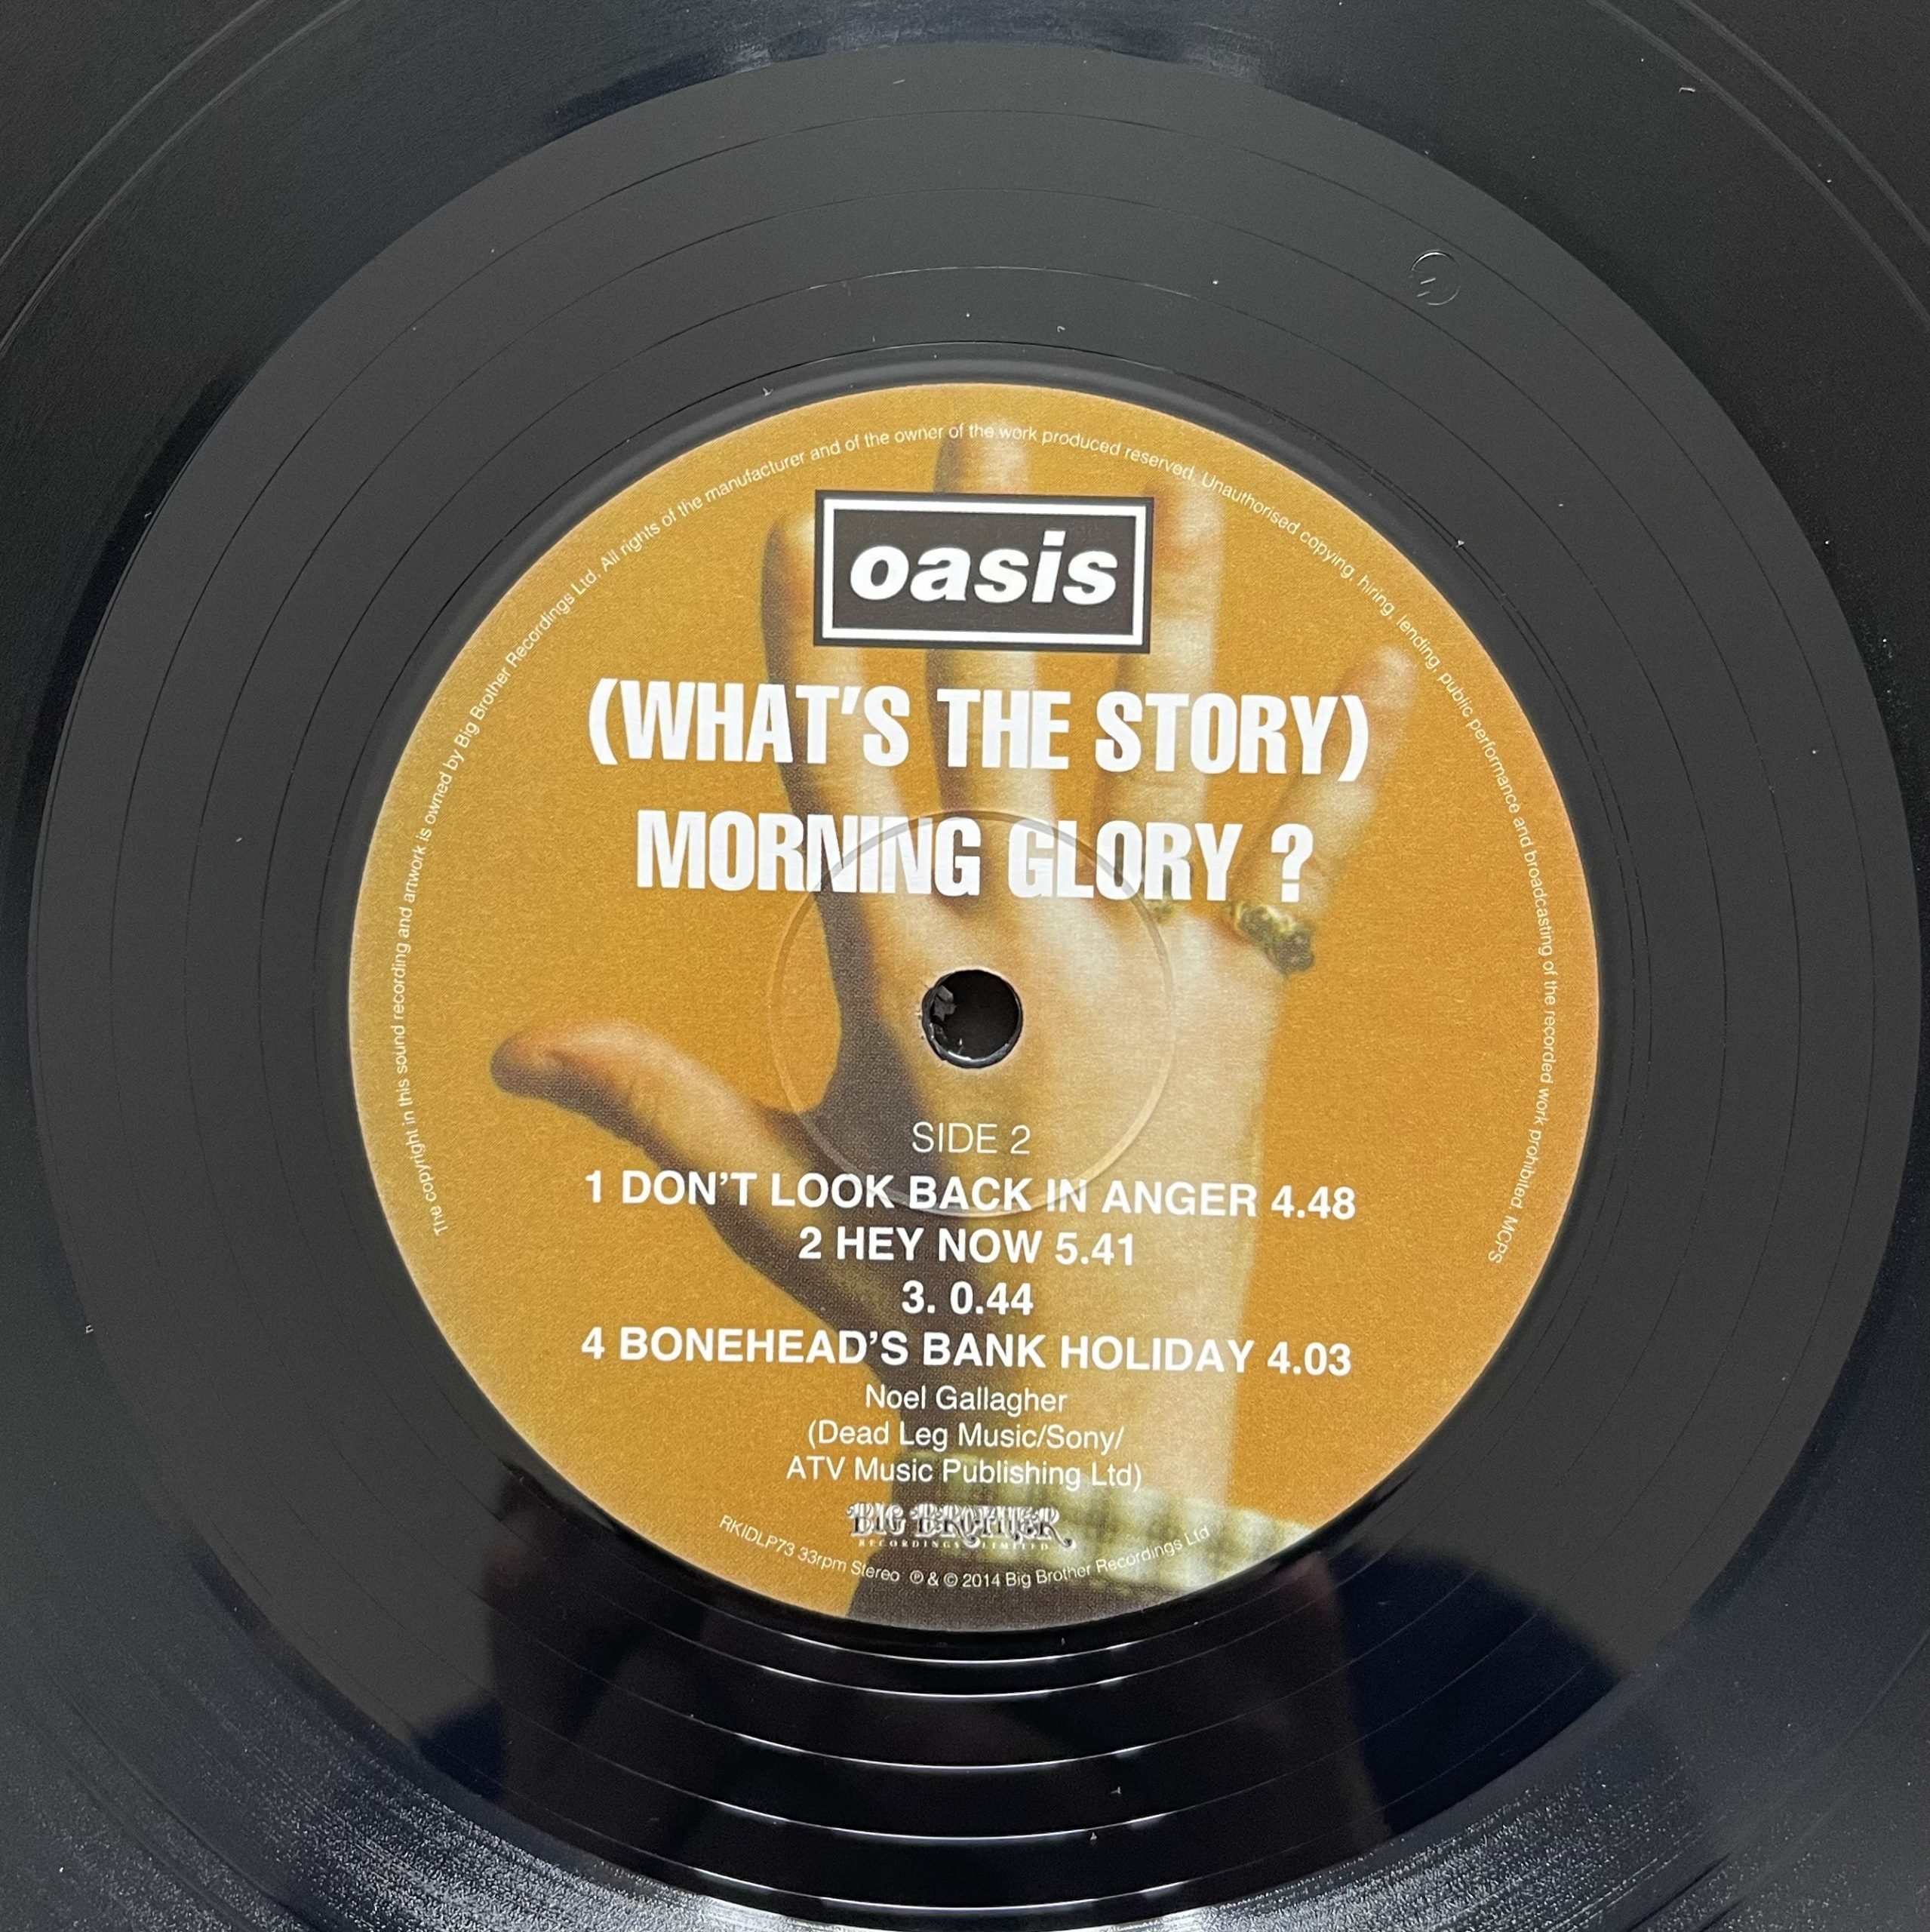 (What's the story) Morning glory?